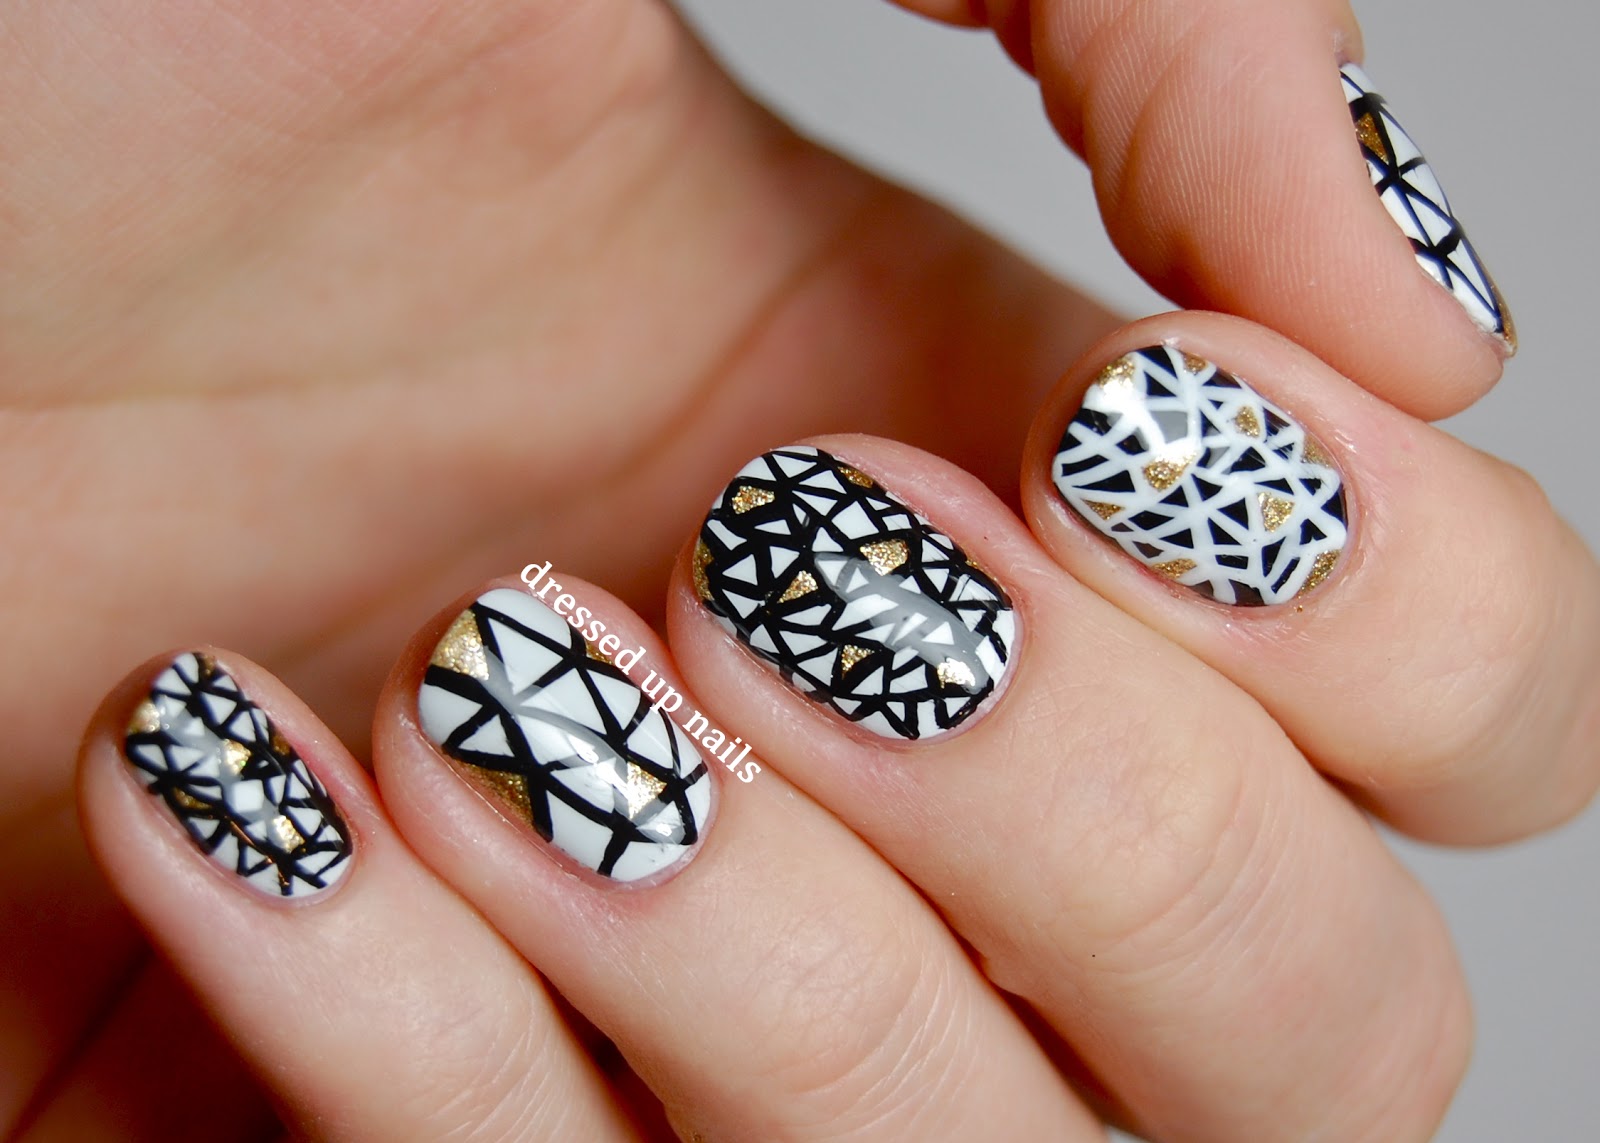 Black and White Nail Art Designs - wide 4